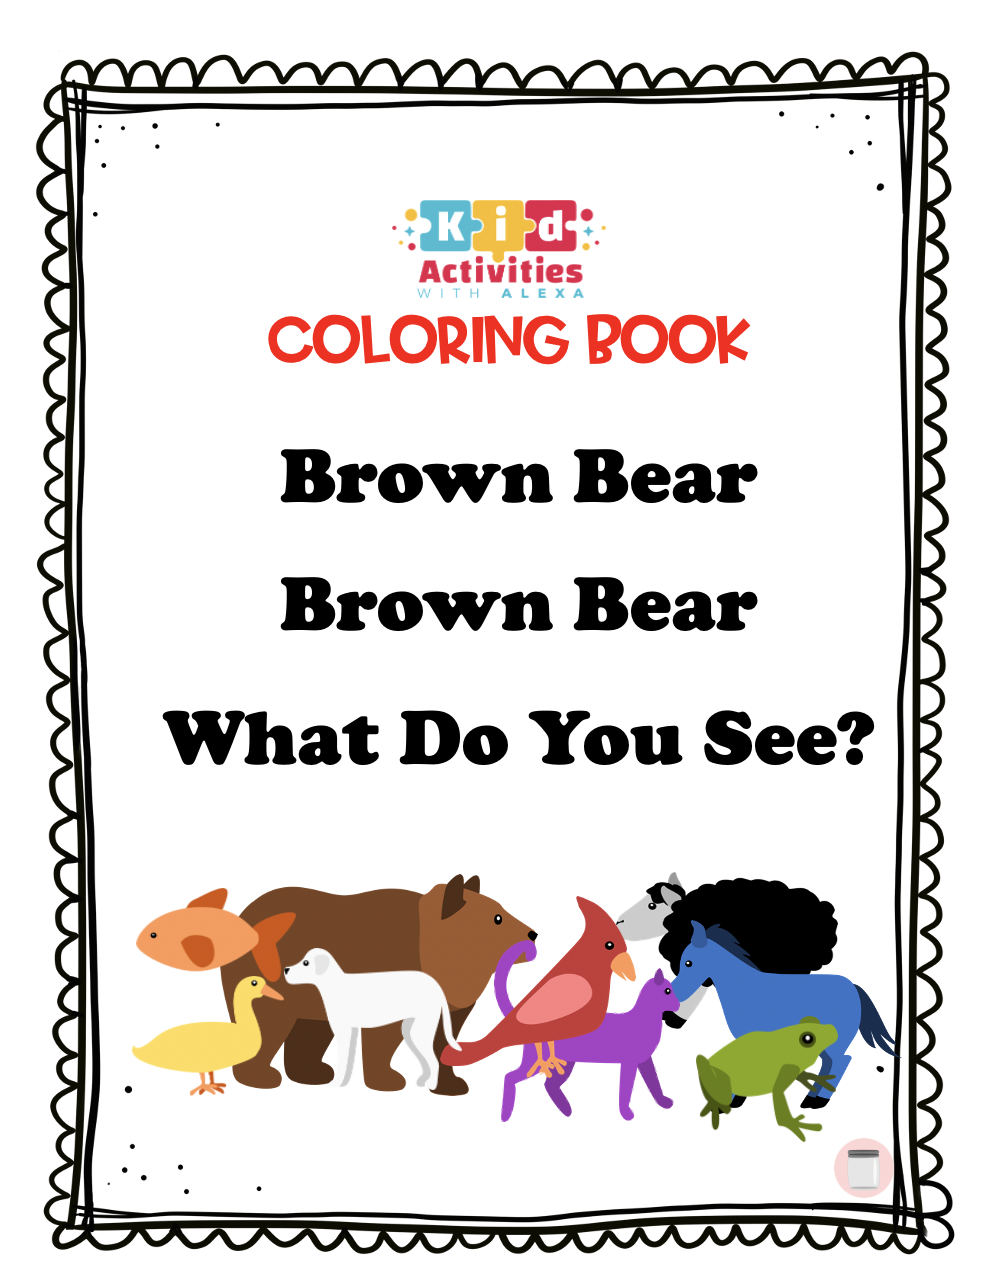 Brown bear brown bear what do you see coloring pages pdf